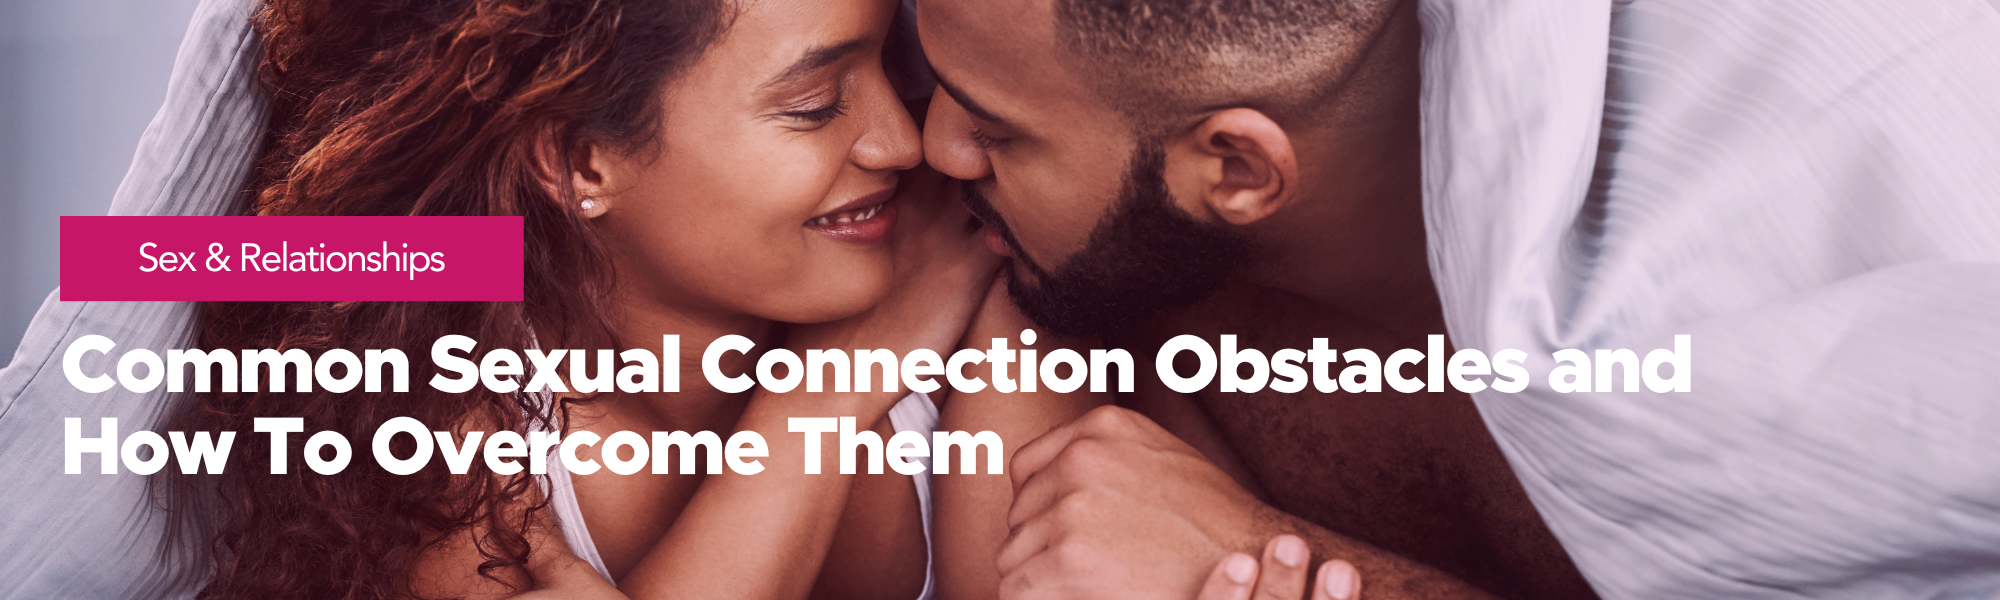 Sex Ed: Sex & Relationships | Common Sexual Connection Obstacles and How To Overcome Them